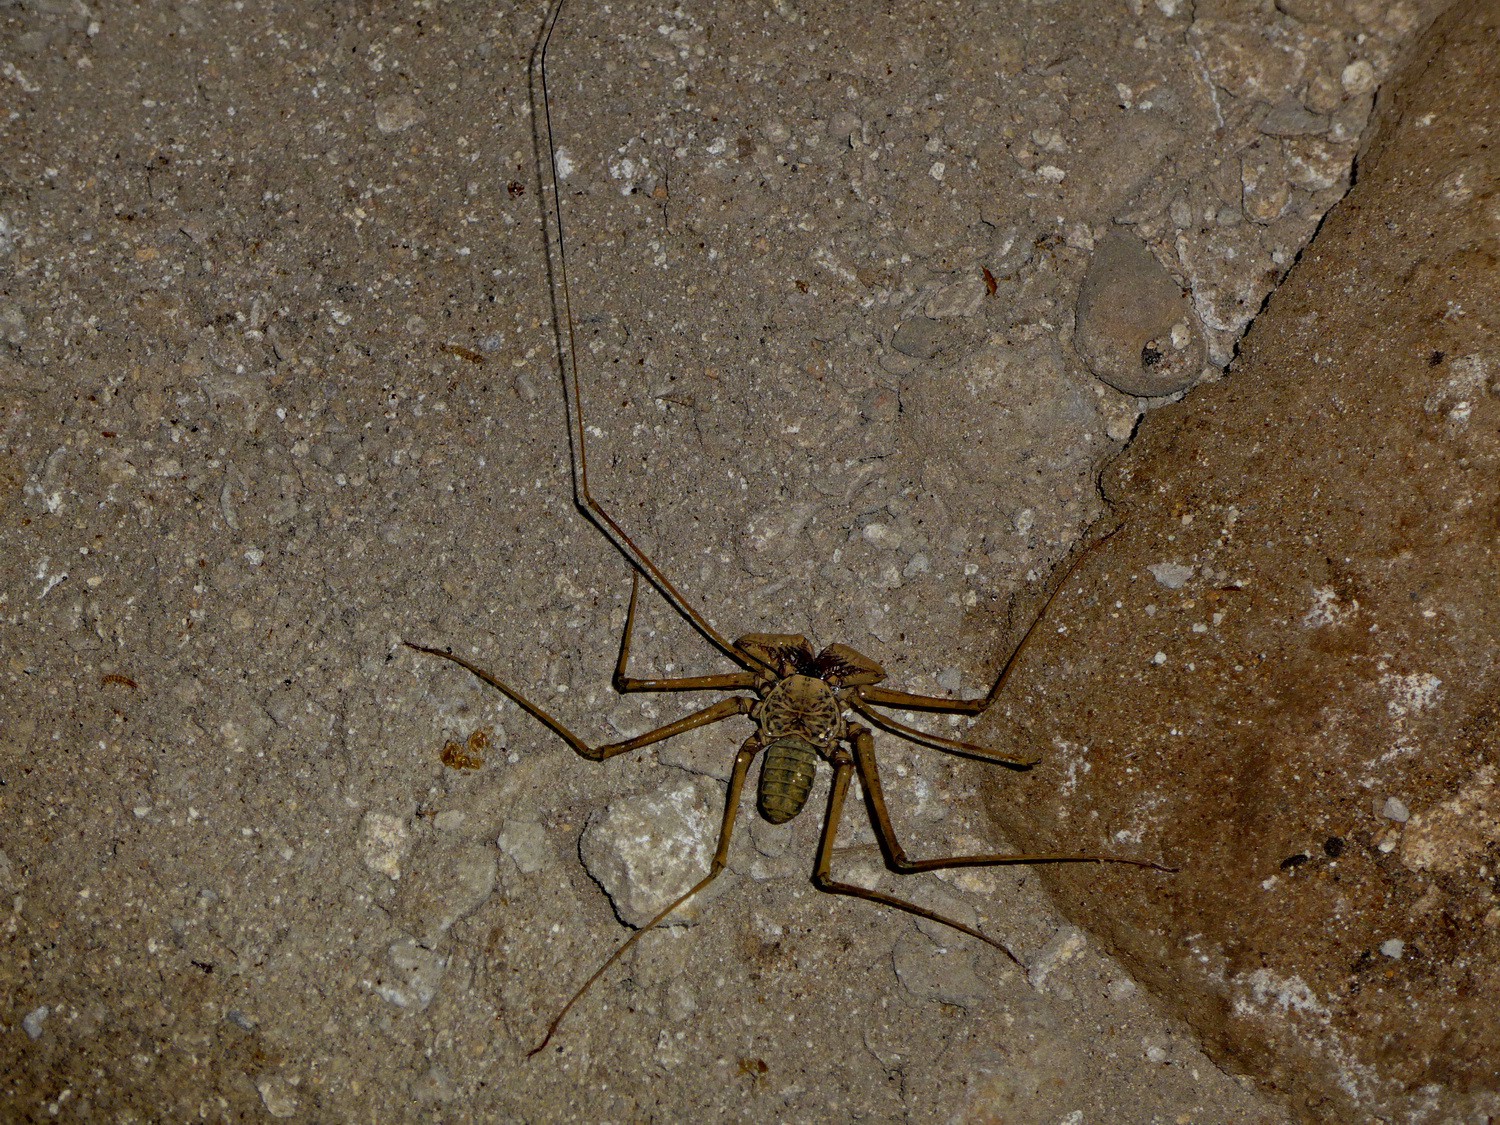 Spider in the cave